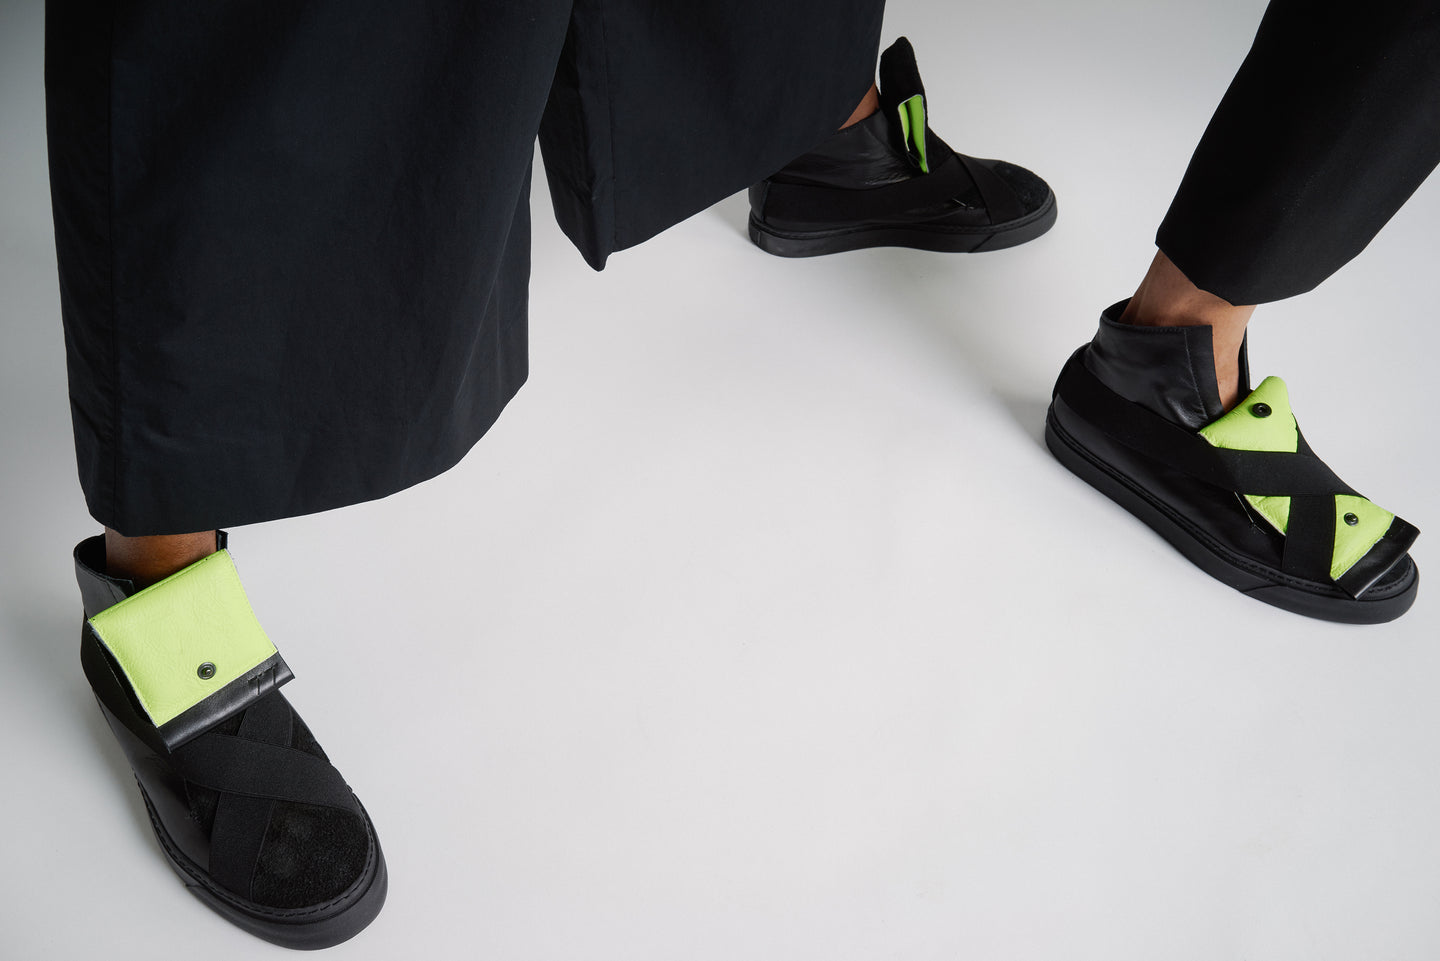 HIGH TOP UNISEX SNEAKERS WITH NEON AND BLACK LEATHER